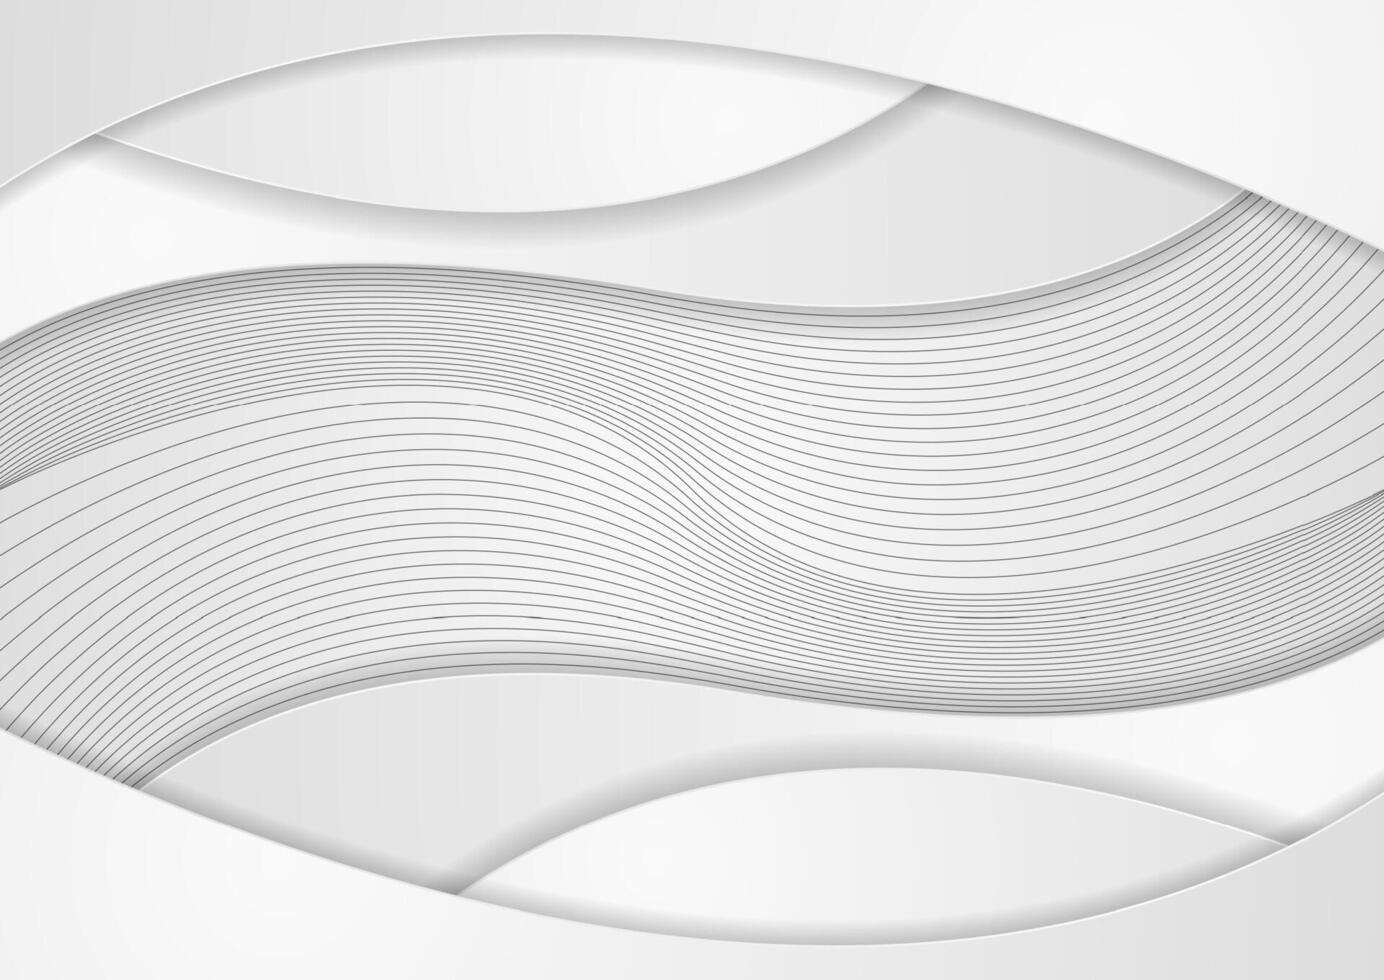 Grey corporate paper wavy abstract background with curved lines vector